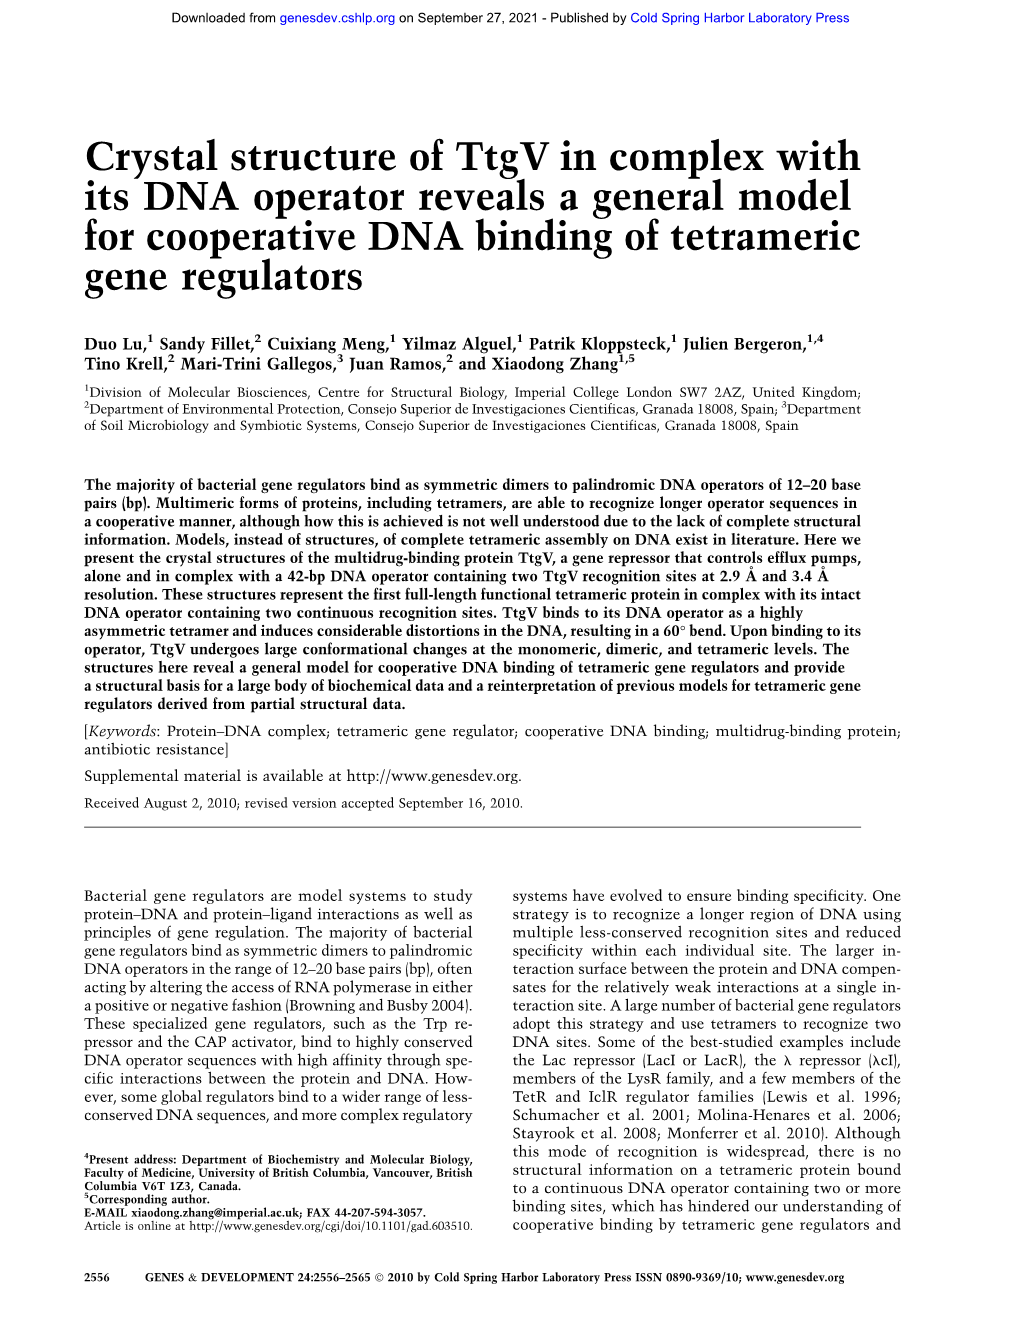 Crystal Structure of Ttgv in Complex with Its DNA Operator Reveals a General Model for Cooperative DNA Binding of Tetrameric Gene Regulators